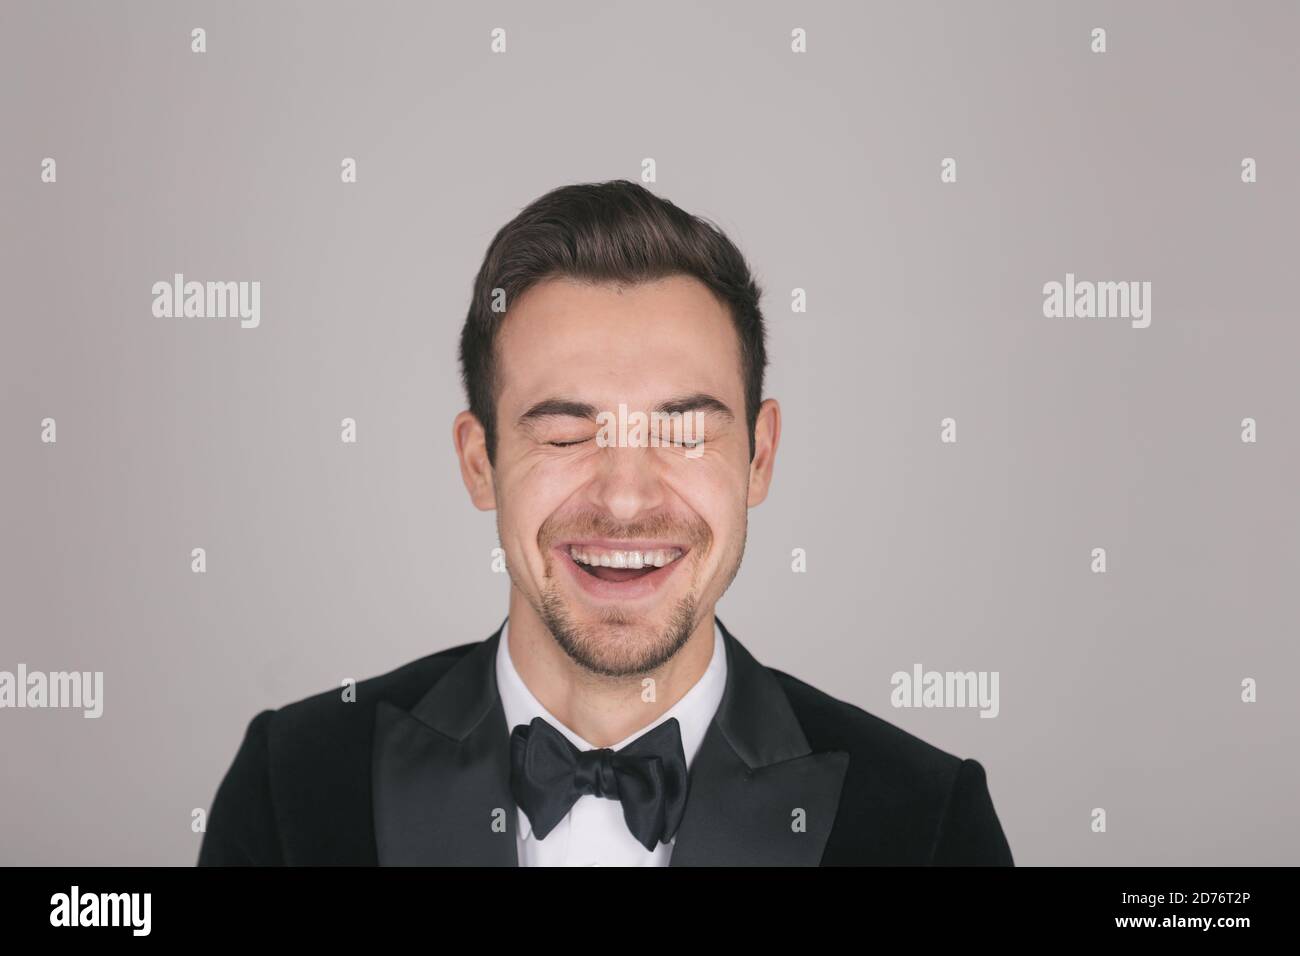 Studio portrait of a young caucasian man in a tuxedo, laughing out loud ...